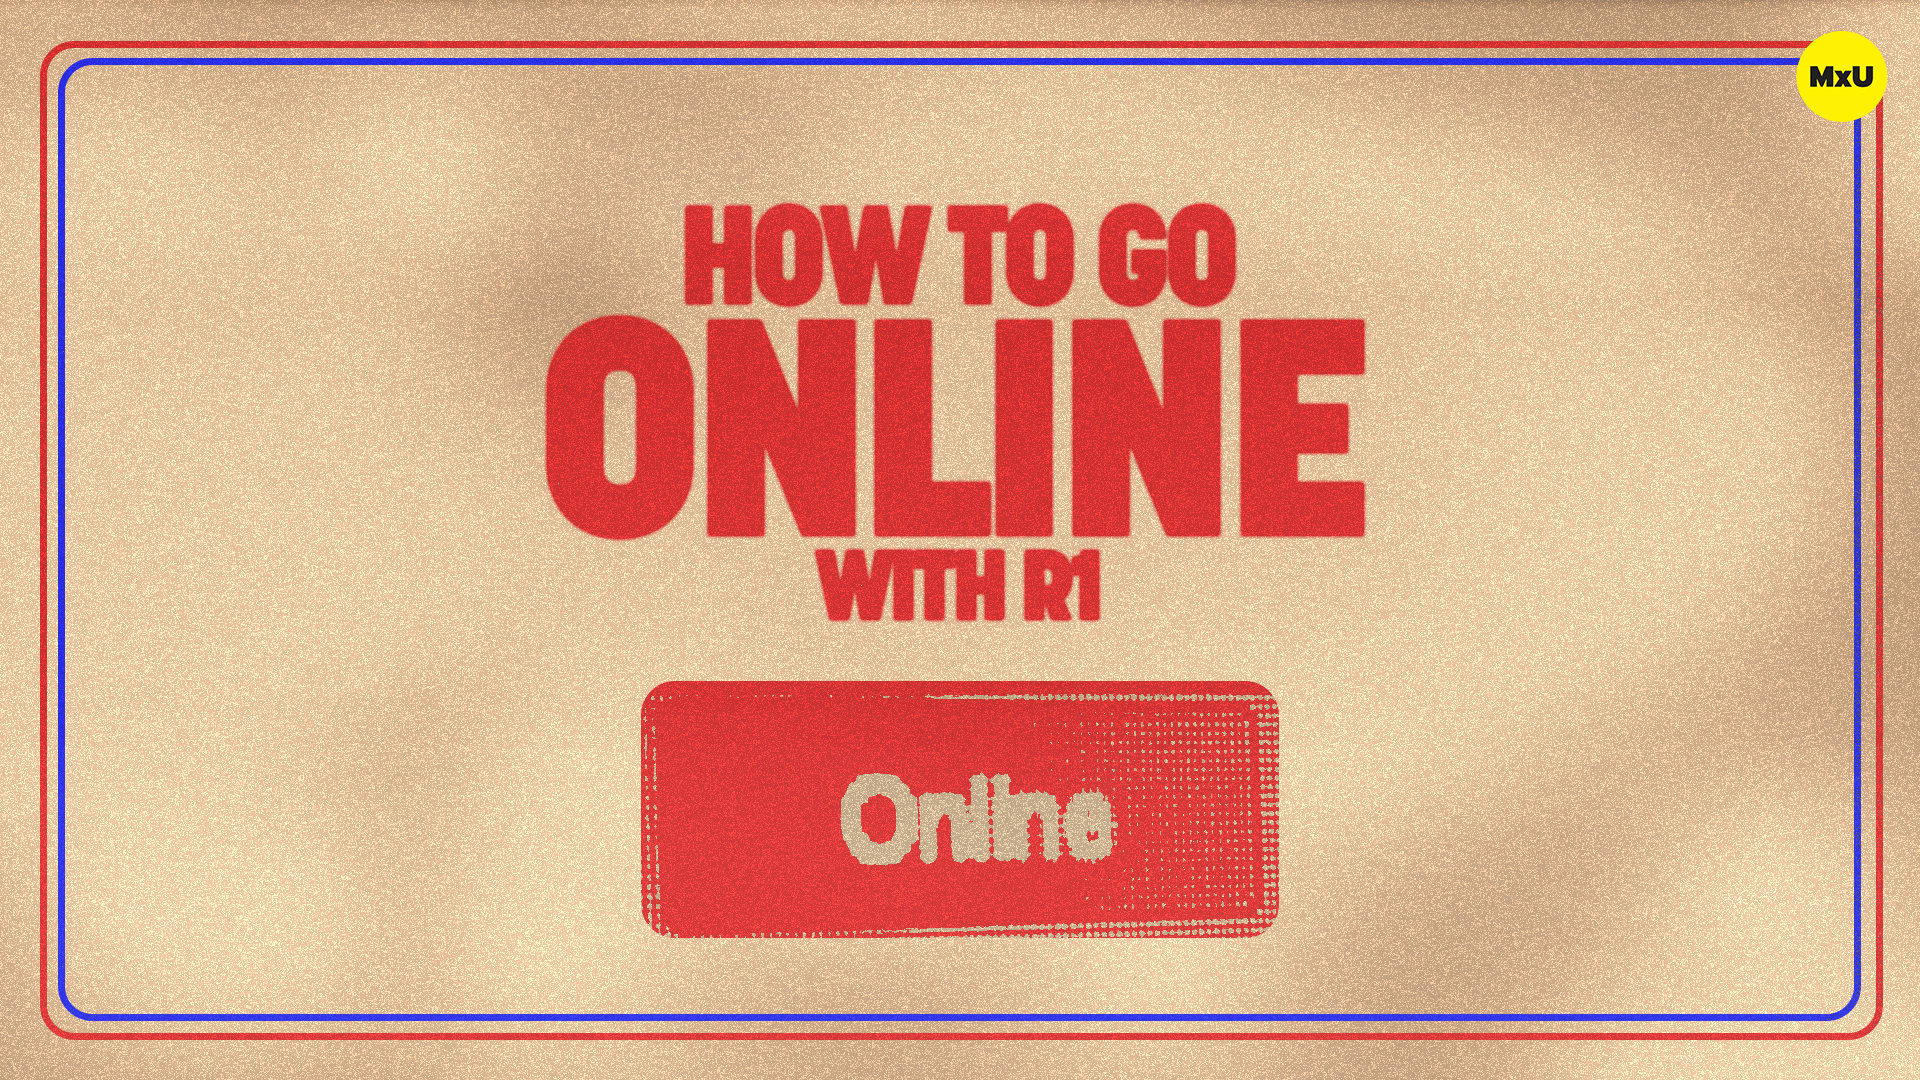 How to Go Online with R1